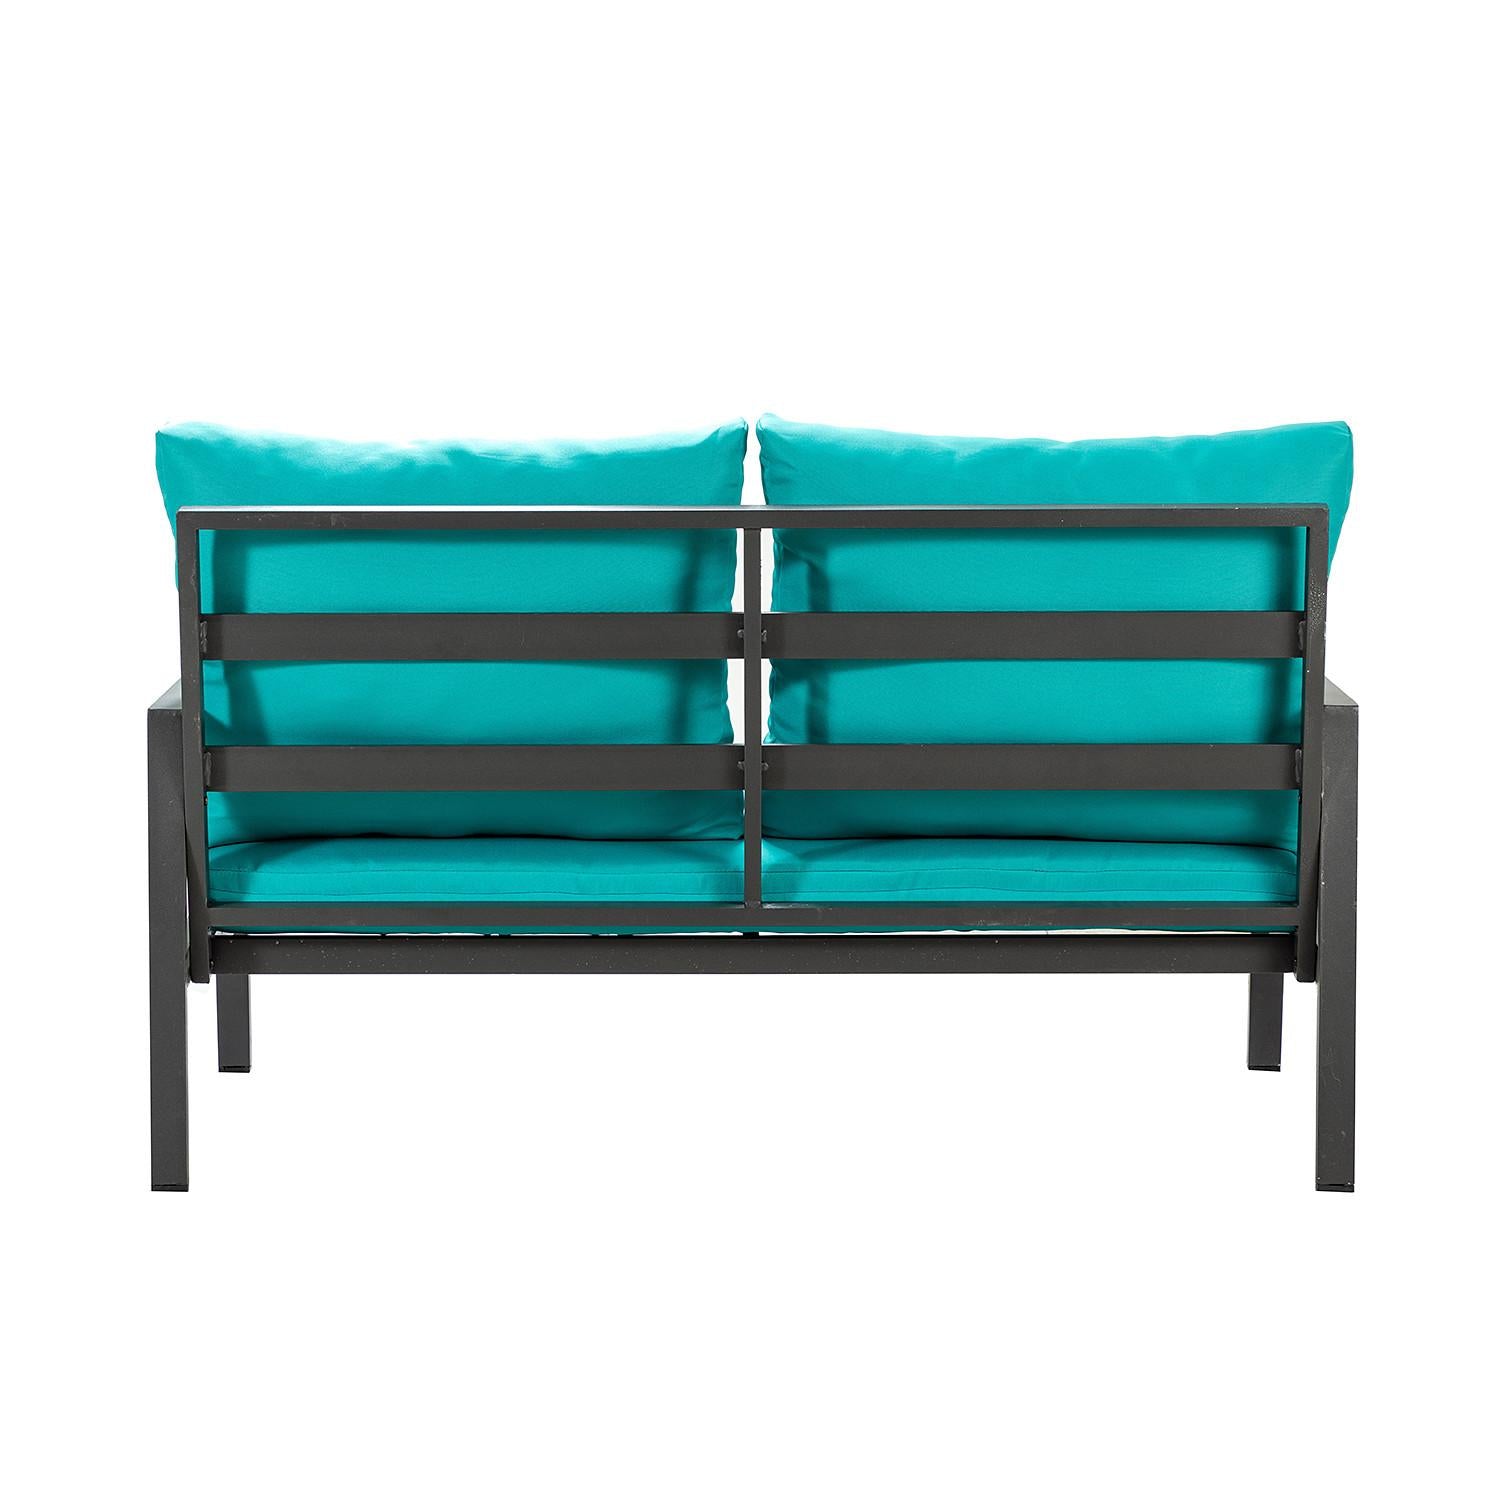 Black Lines and Aqua Outdoor Sofa Seating and Table Set